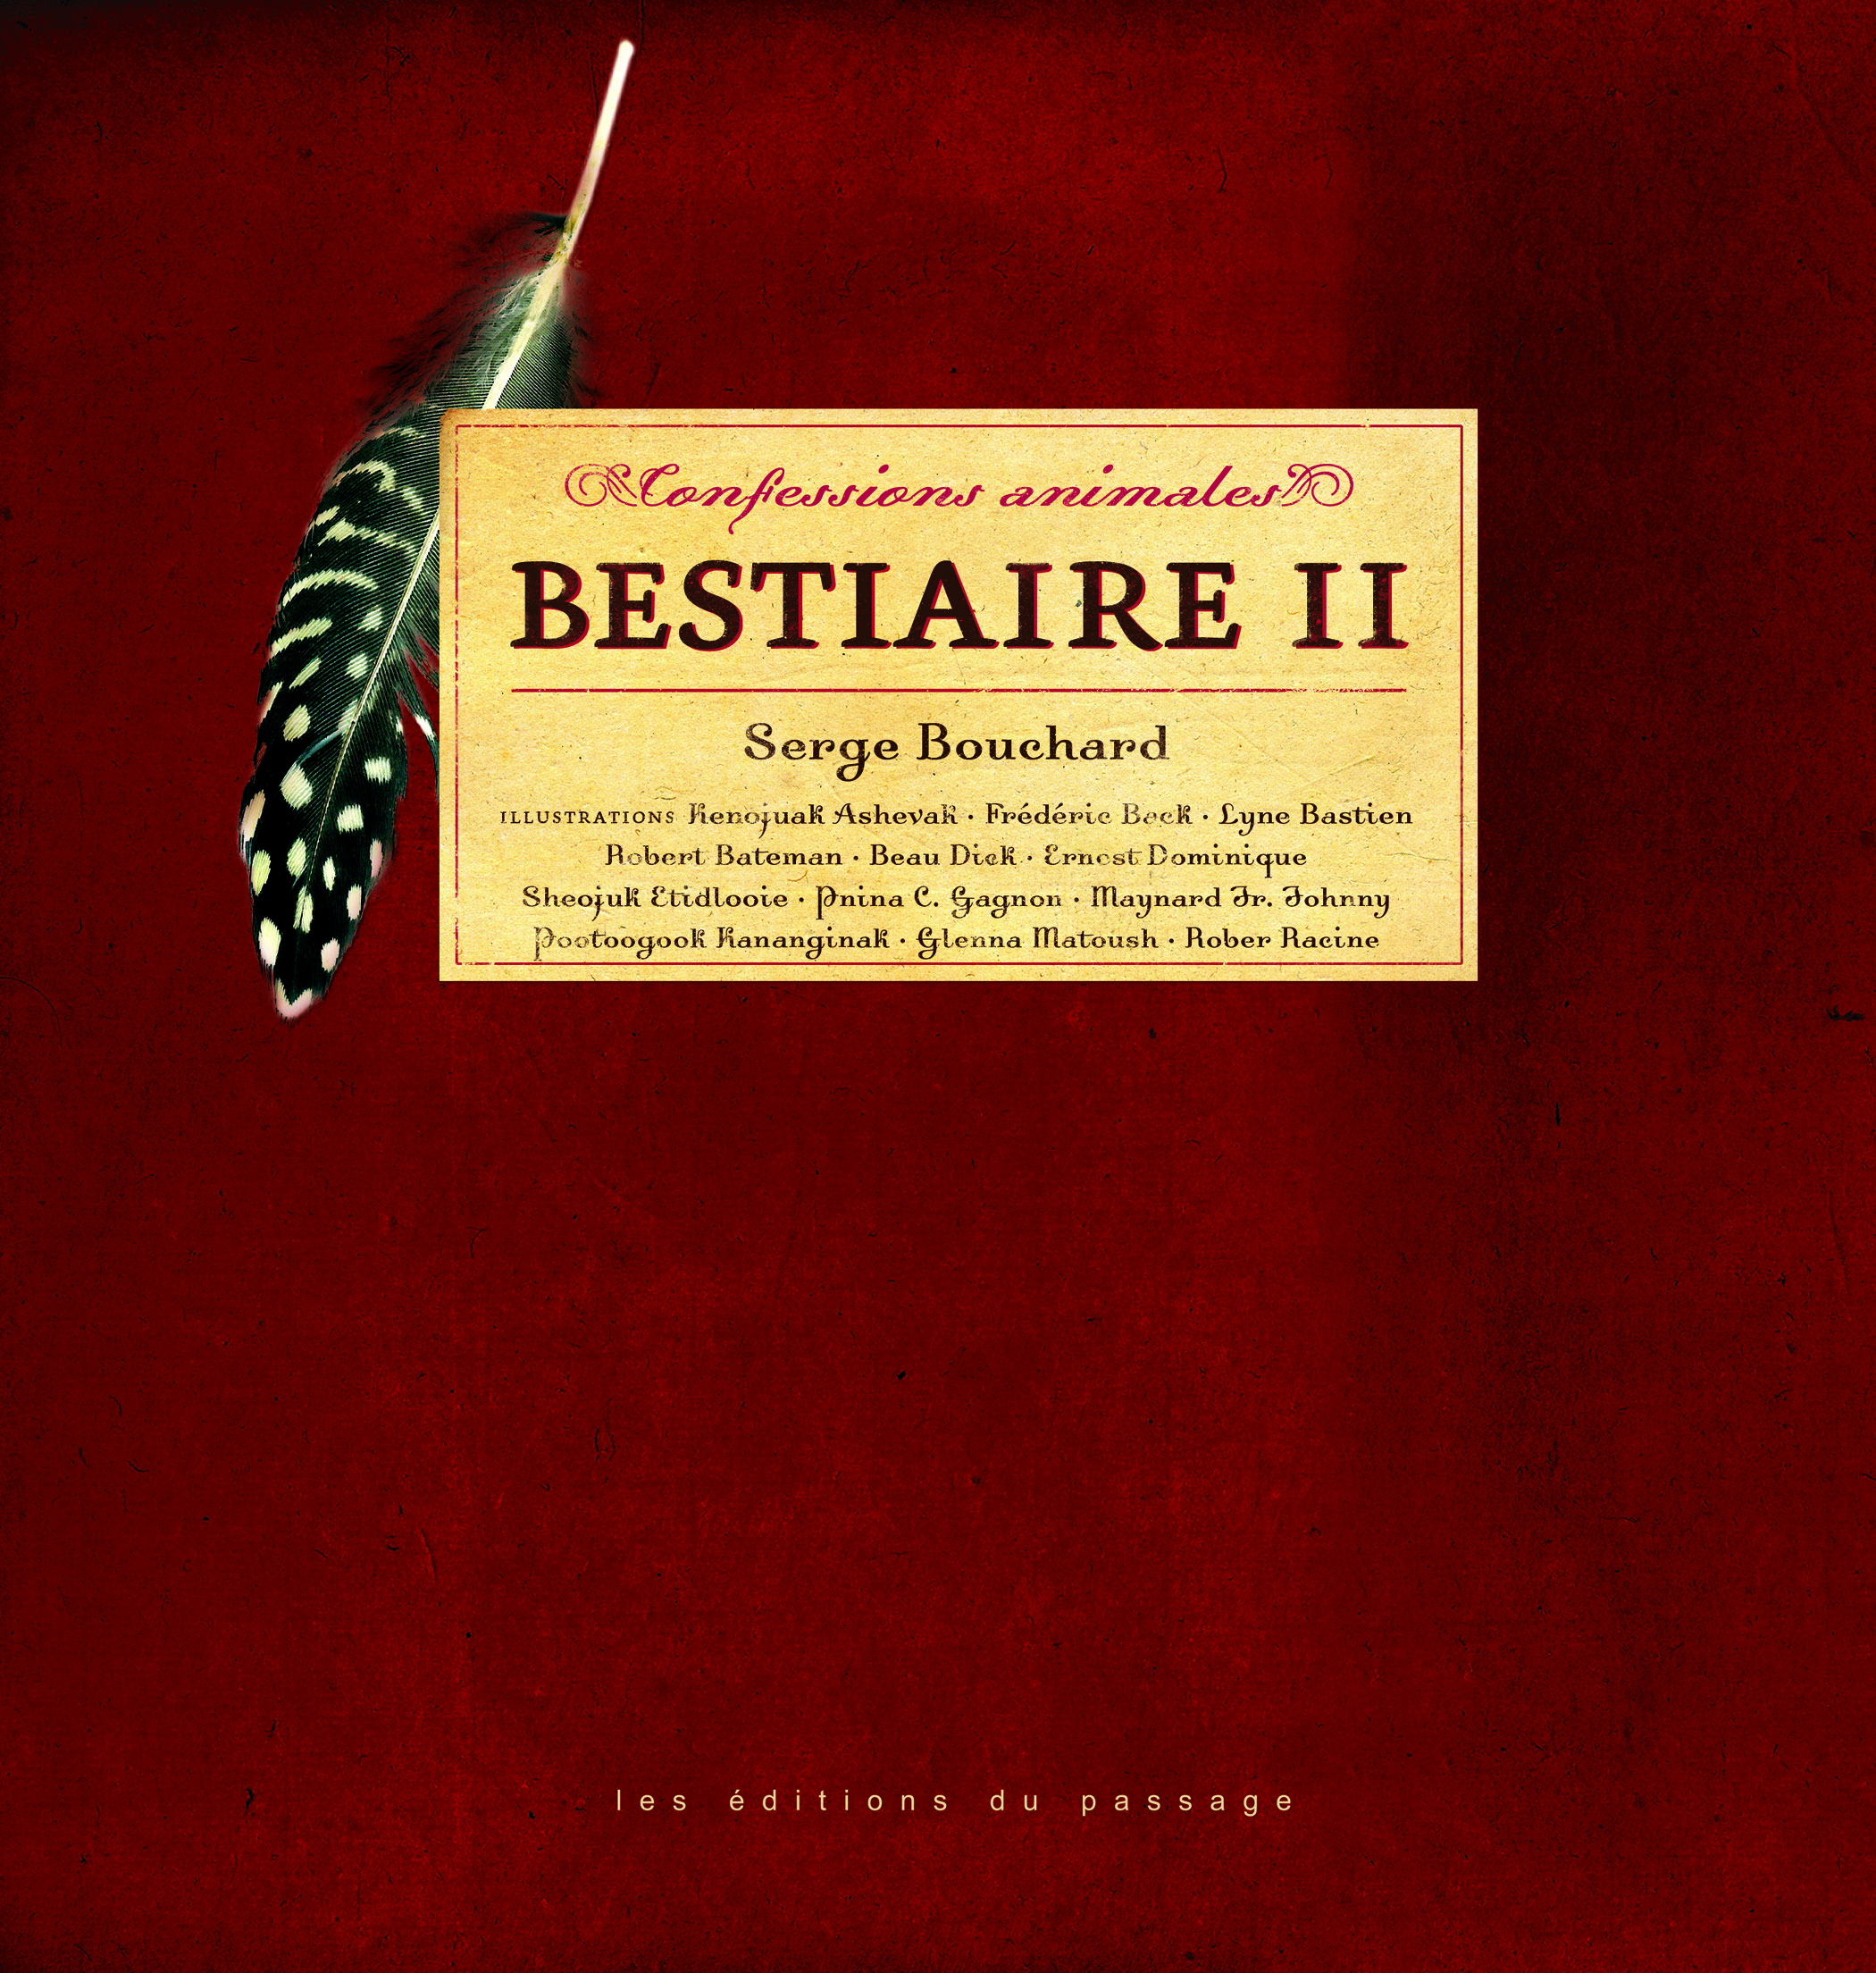 Confessions animales - Bestiaire 2 - couverture